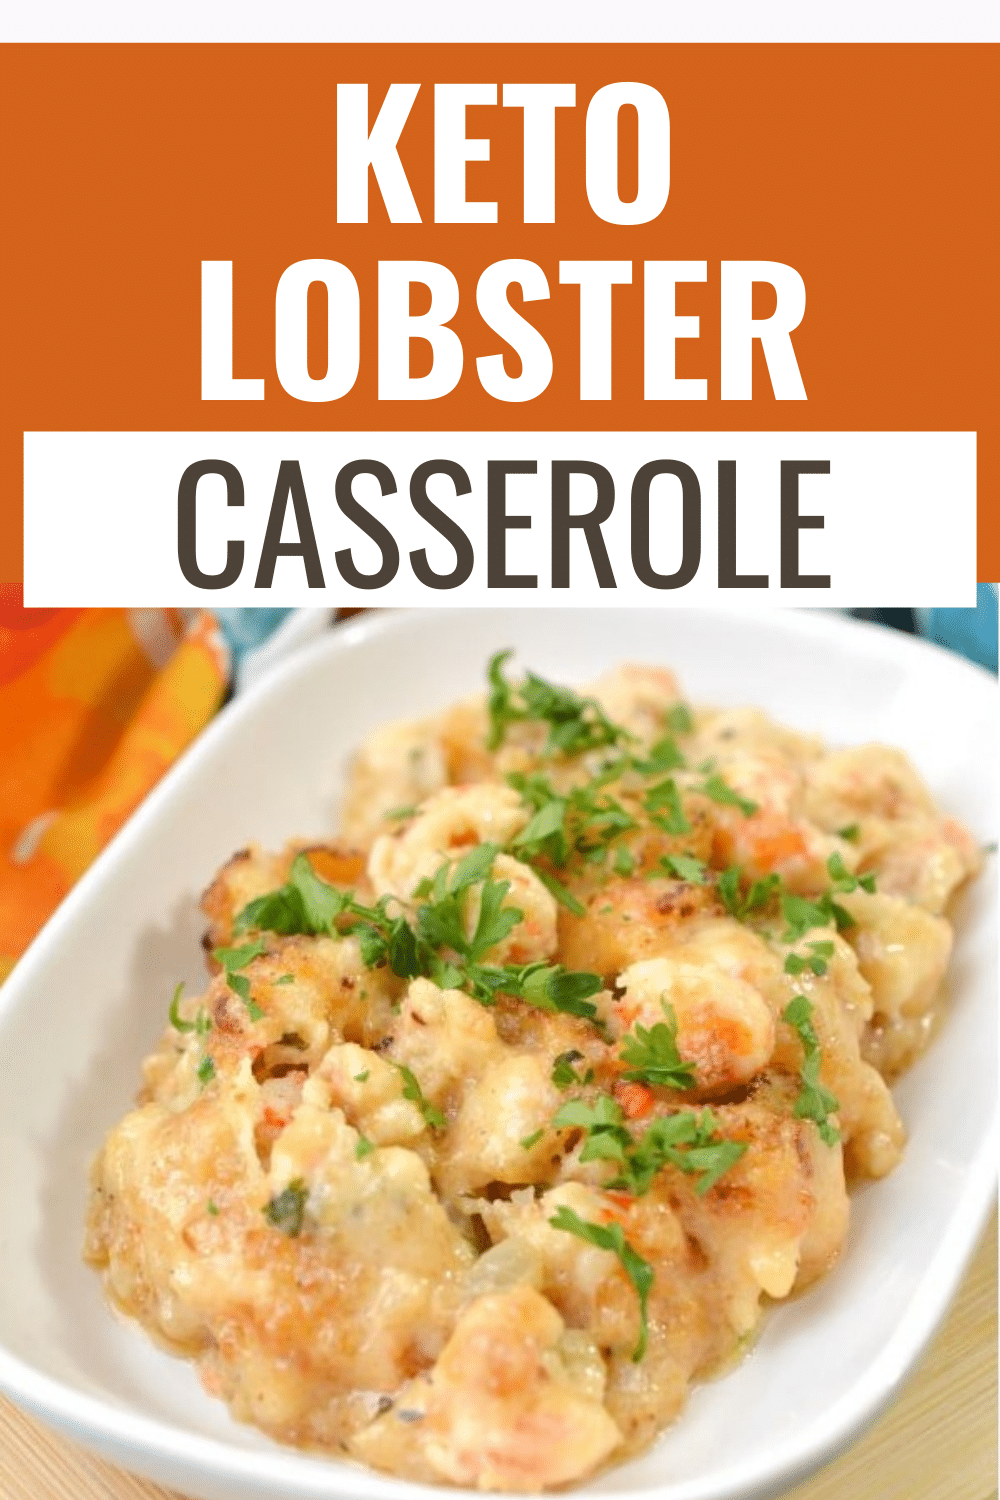 Keto lobster casserole is a delicious low carb dinner recipe that is full of lots of lobster meat. This decadent dinner goes great with steamed veggies. #keto #lowcarb #lobster via @wondermomwannab